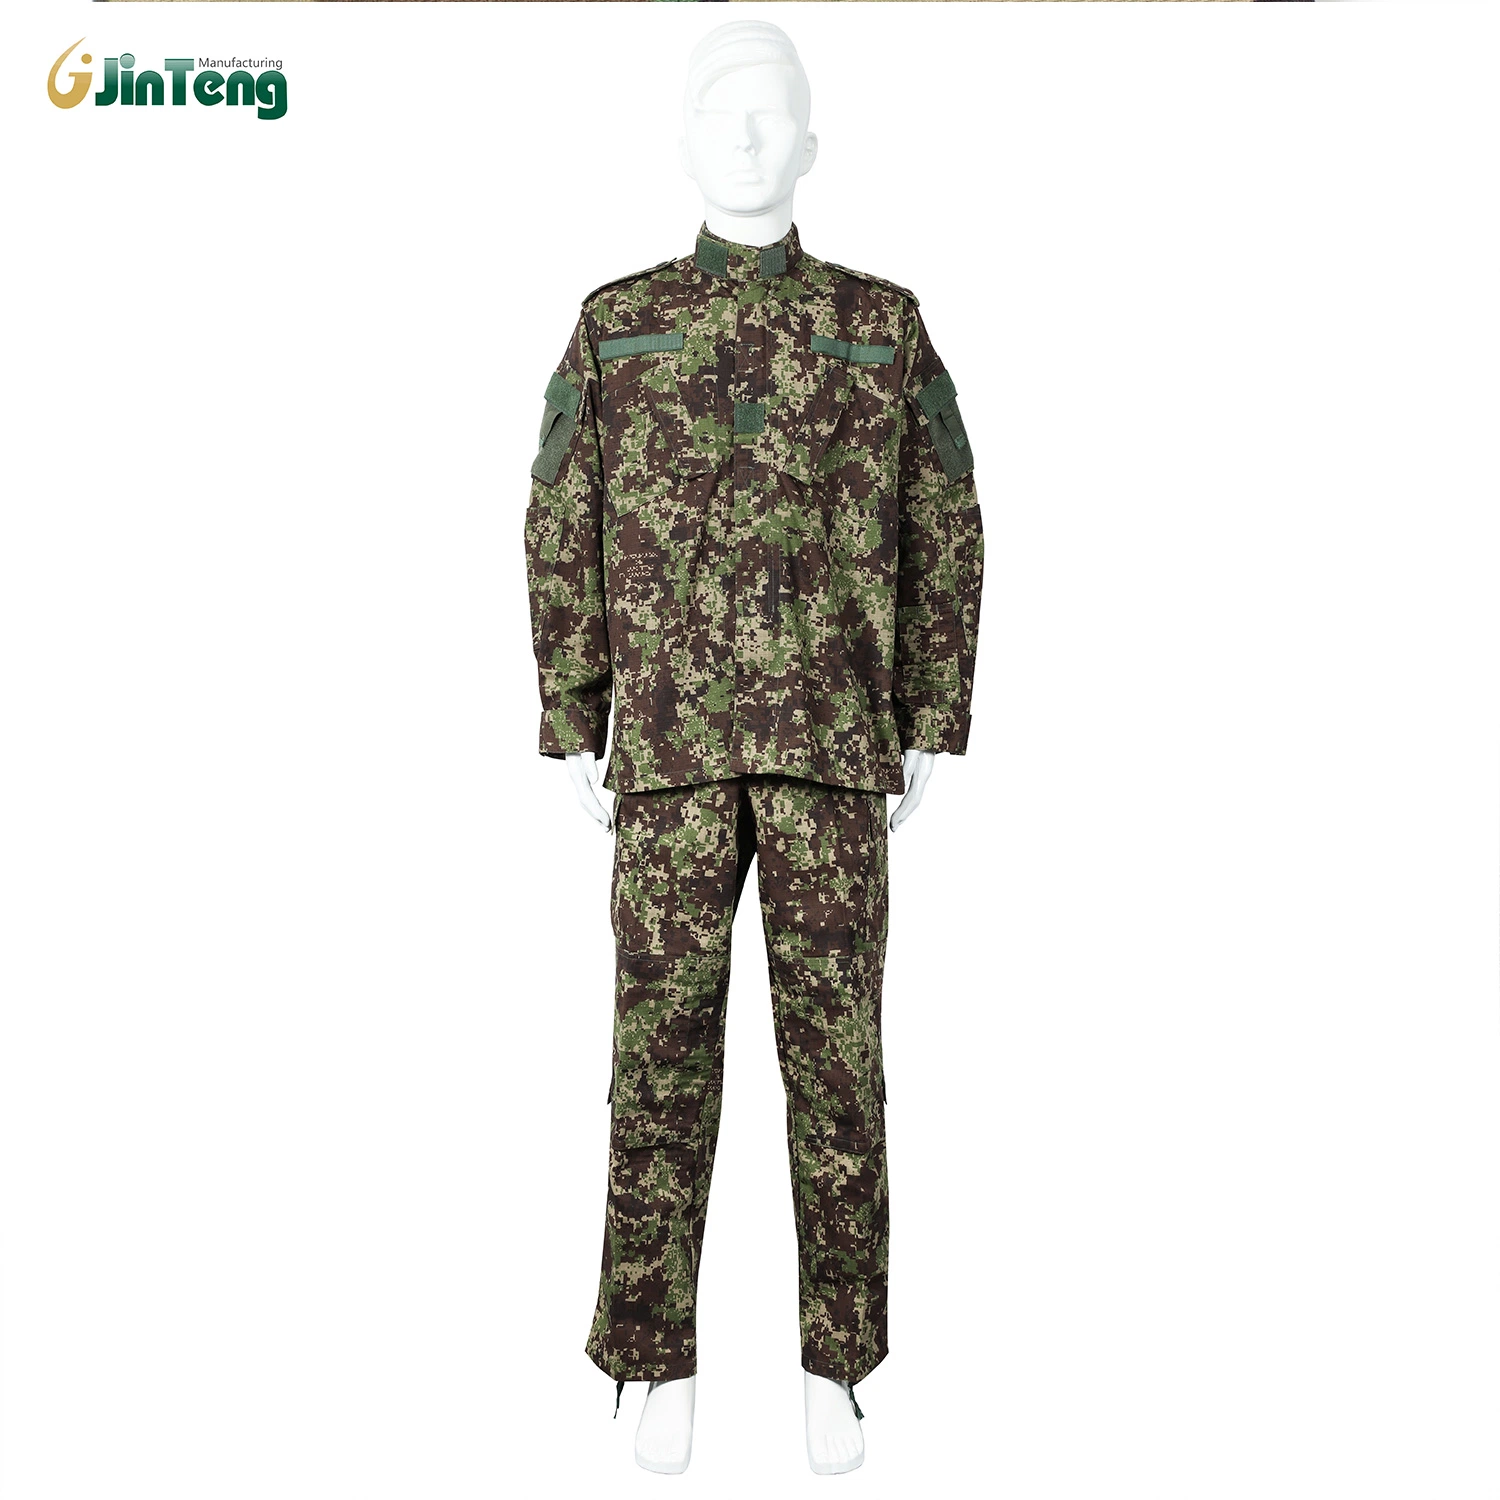 Good Service Jinteng Military style Combat Security Price Army style Uniforms Tactical Acu Uniform